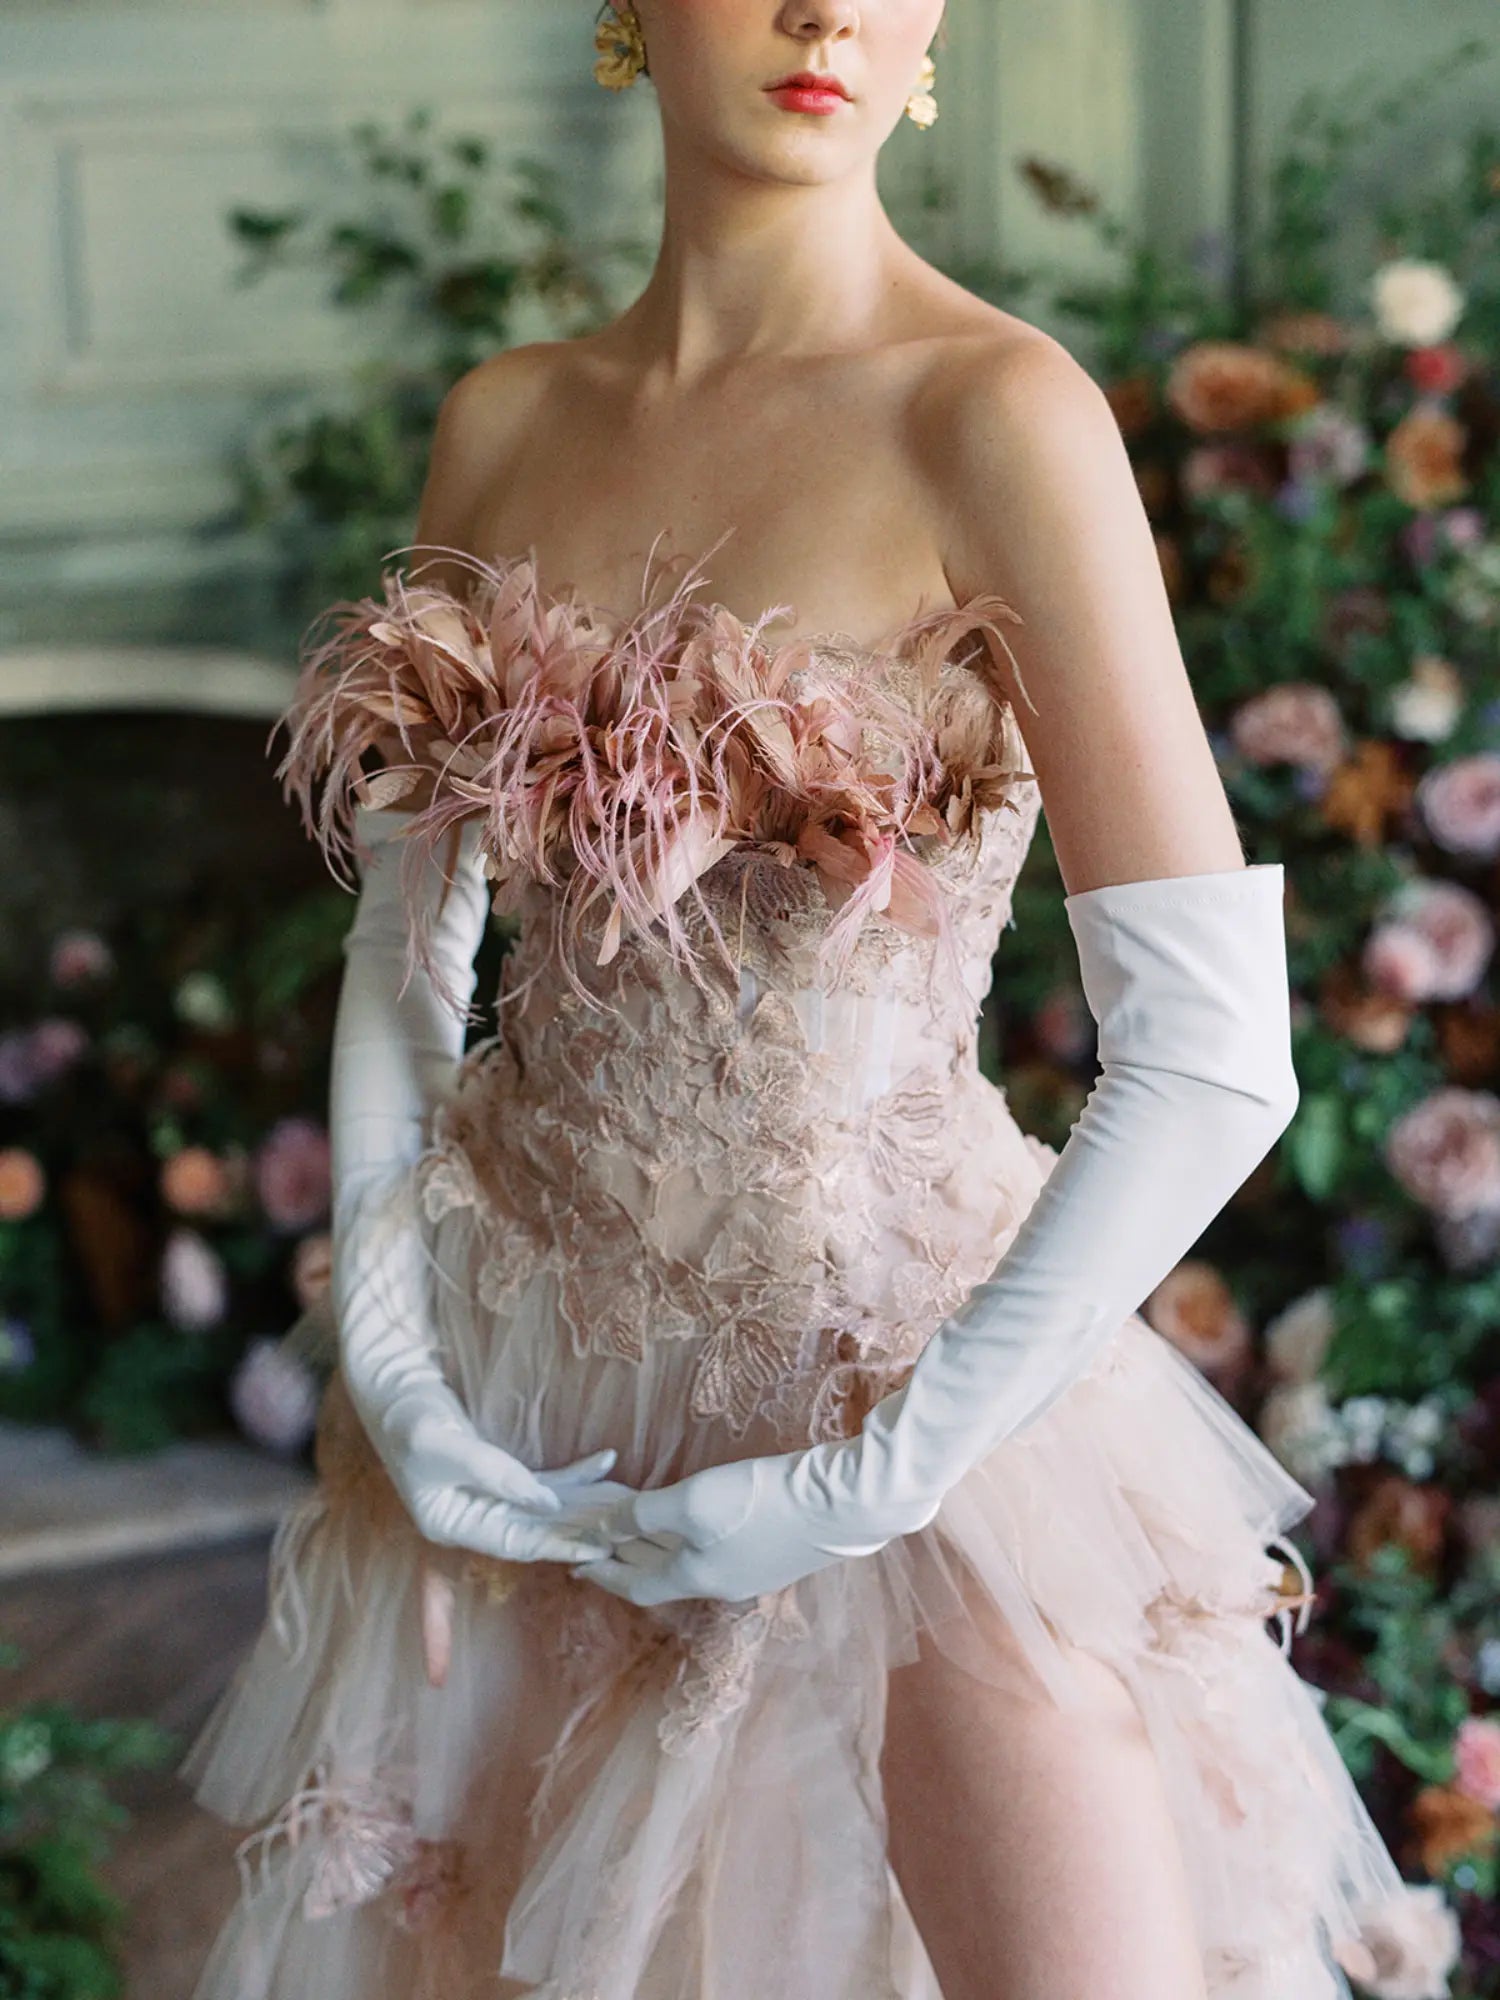 A woman in a pink dress with feathers and white gloves. She is wearing elegant over-the-elbow gloves, The Sunny - White Opera Gloves by LadyFinch, that perfectly complement her outfit, making her look even more stunning. These gloves are pure.